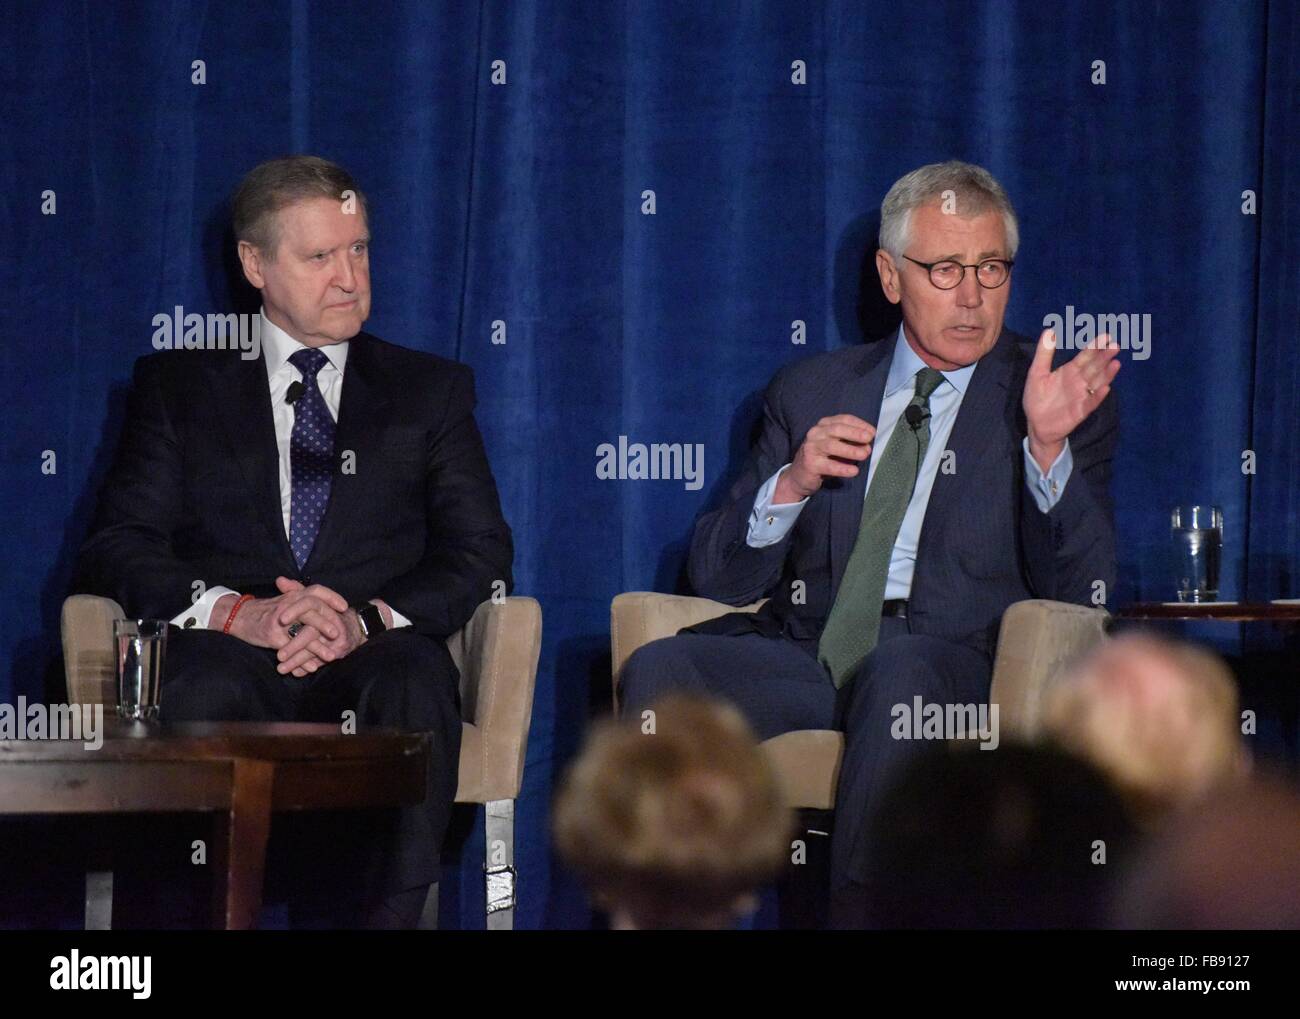 Washington, DC, USA. 11th Jan, 2016. Former U.S. defense secretary Chuck Hagel(R) speaks during an event held by National Committee on U.S.-China Relations in Washington, DC, the United States, Jan. 11, 2016. Four former U.S. defense secretaries, Chuck Hagel, William Cohen, William Perry, and Harold Brown, on Monday encouraged their country and China to boost military exchanges to enhance mutual trust. Credit:  Bao Dandan/Xinhua/Alamy Live News Stock Photo